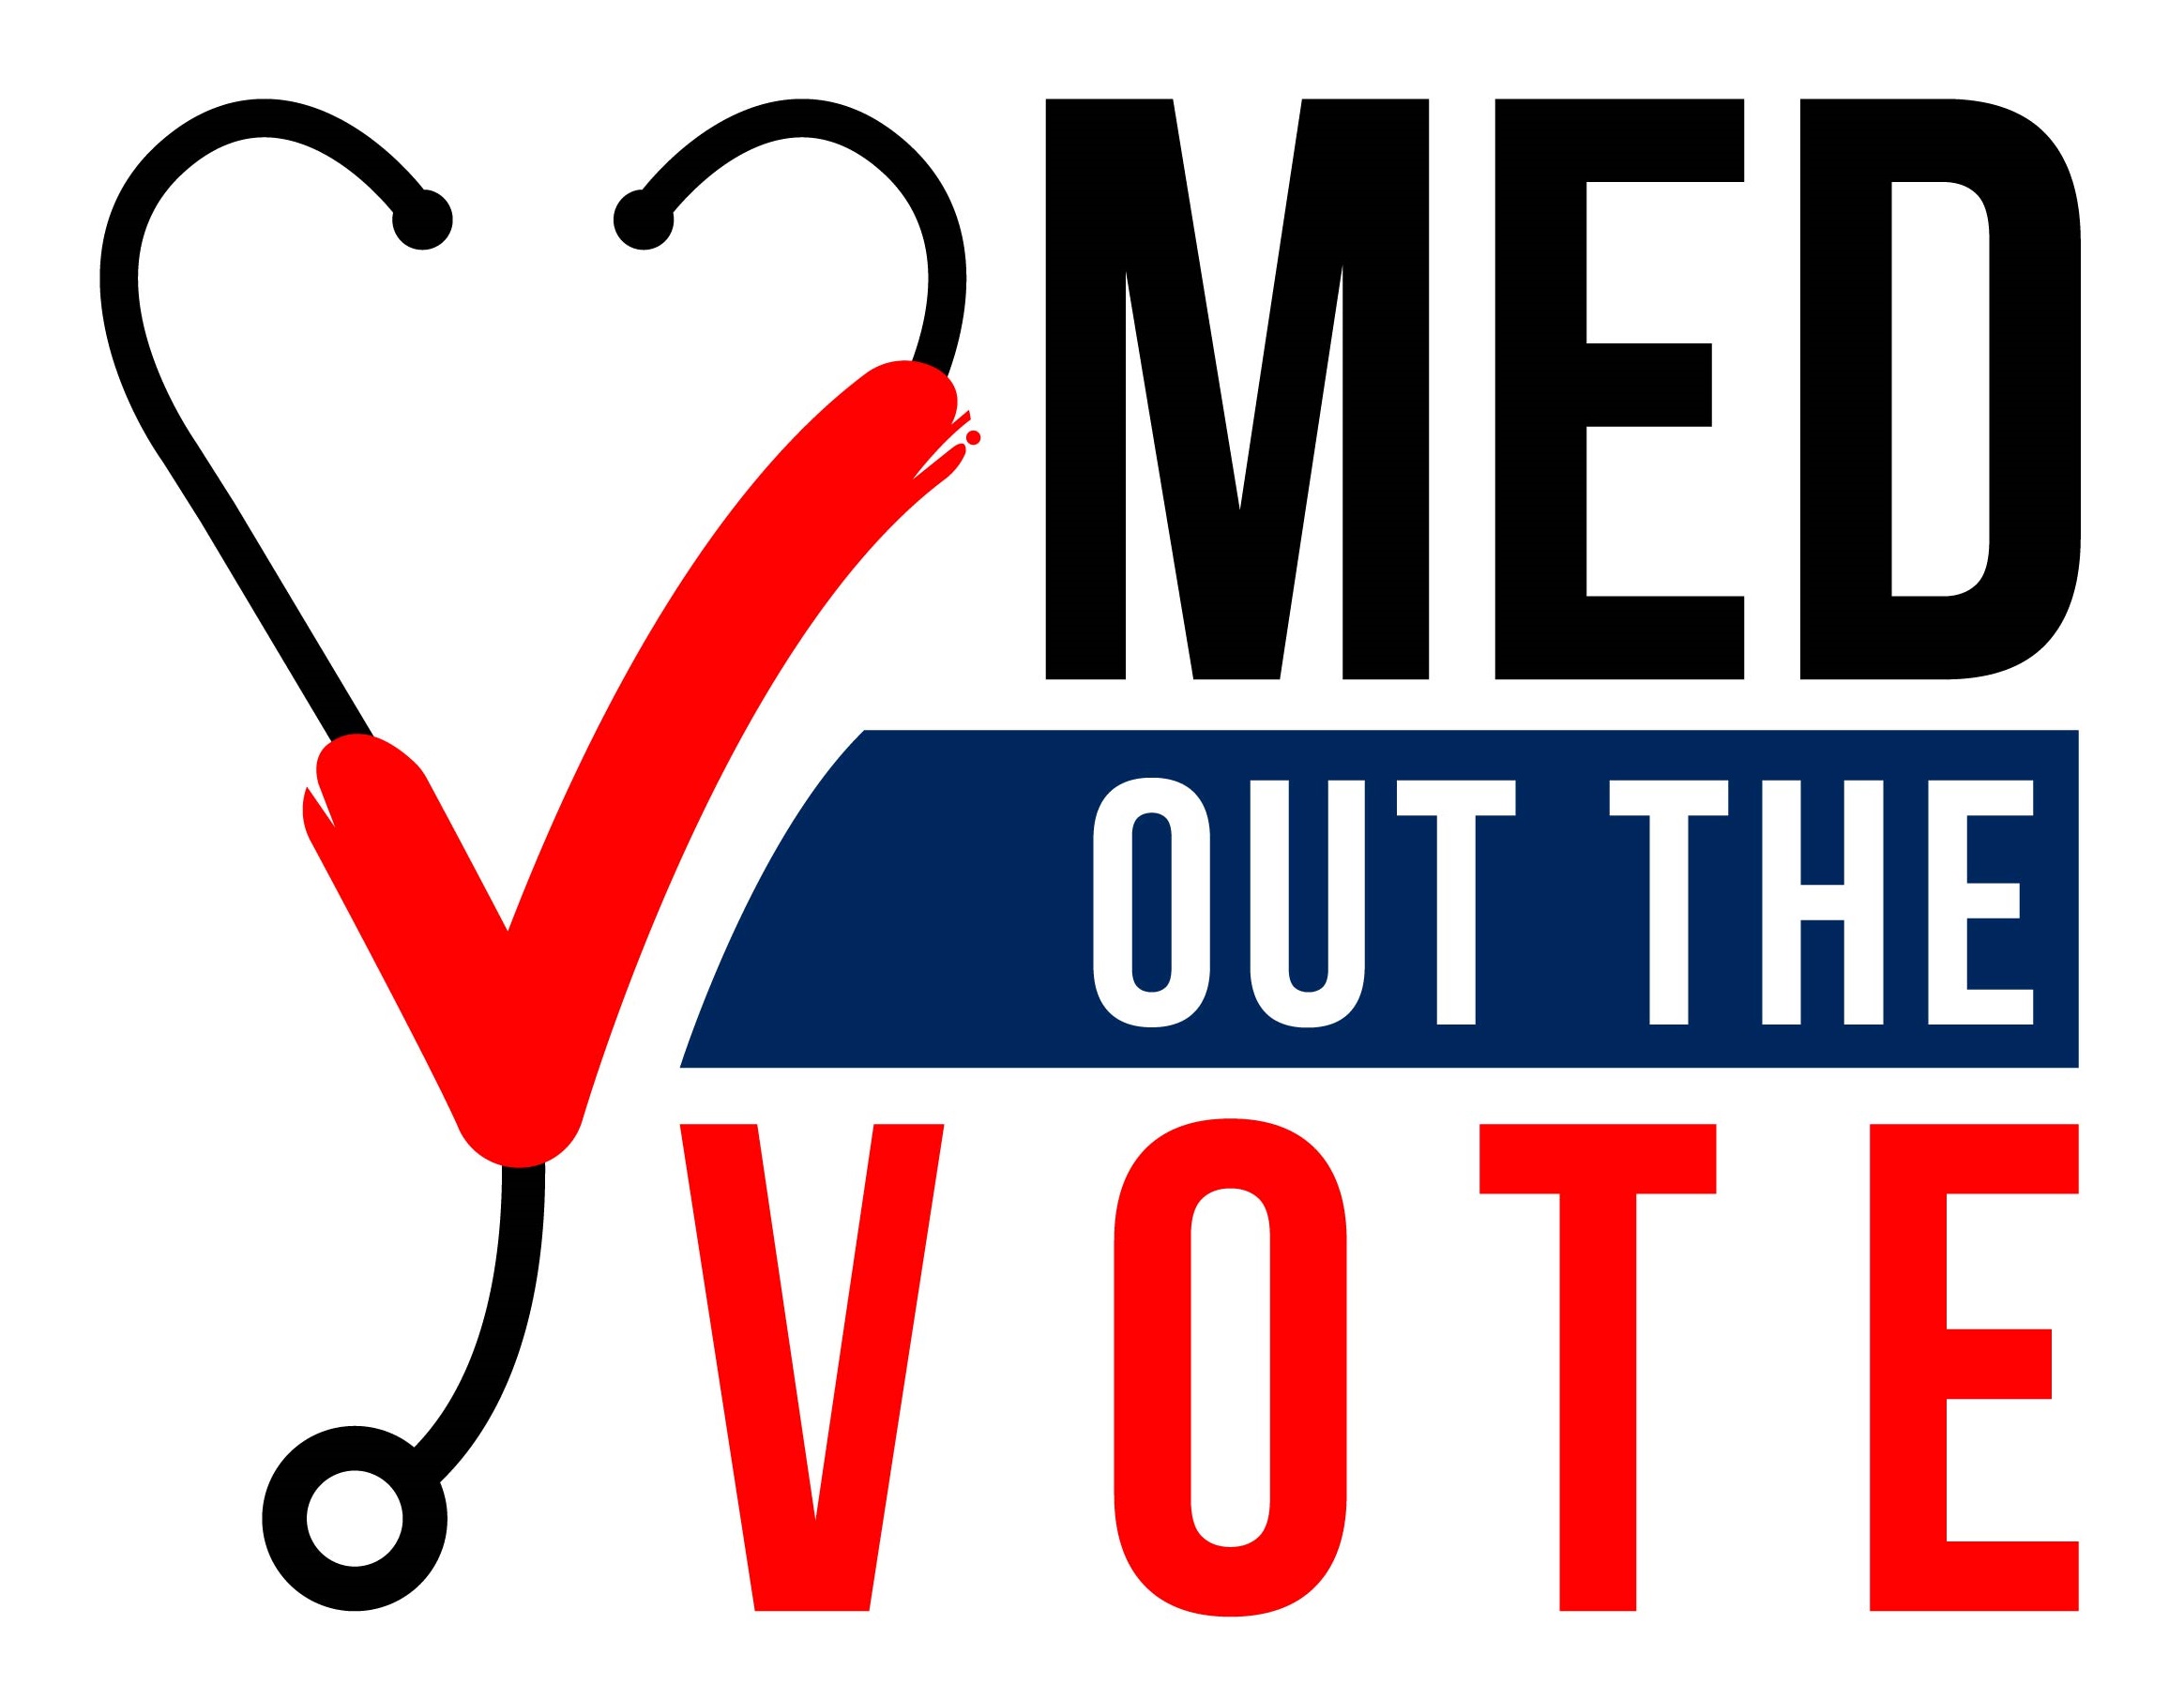 Med Out the Vote